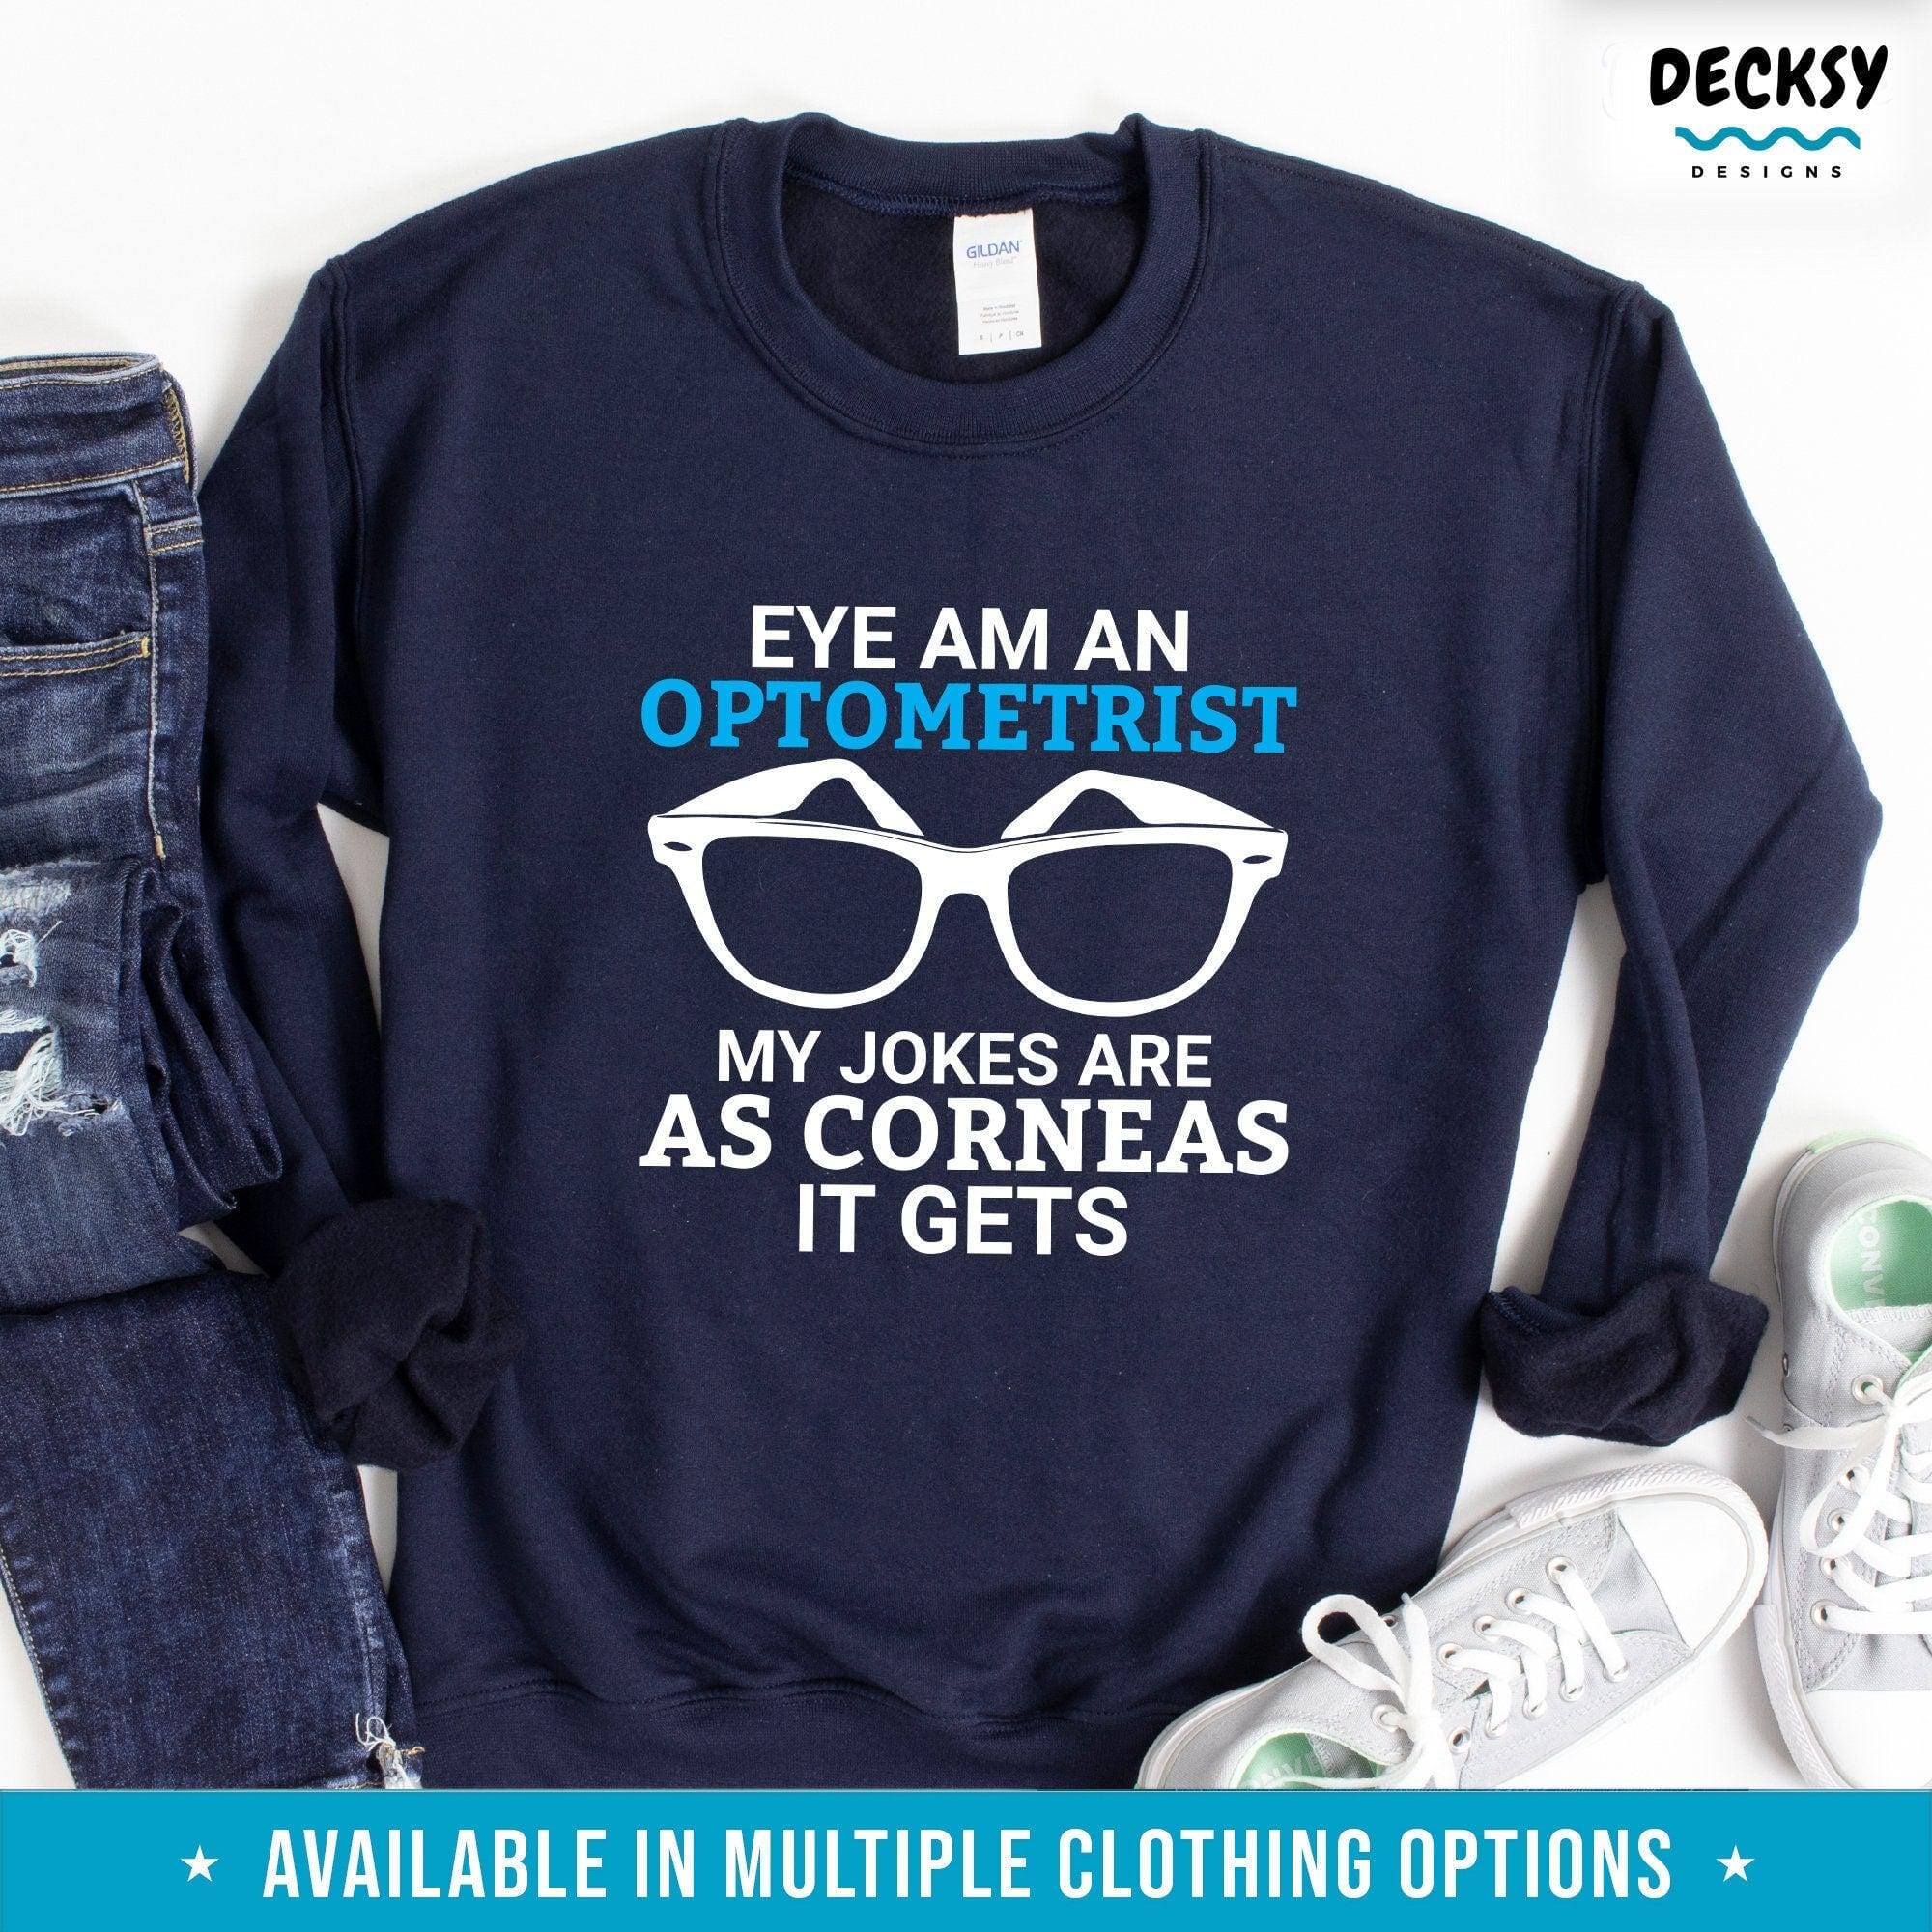 Optometrist Shirt, Gift for Optometry Student-Clothing:Gender-Neutral Adult Clothing:Tops & Tees:T-shirts:Graphic Tees-DecksyDesigns